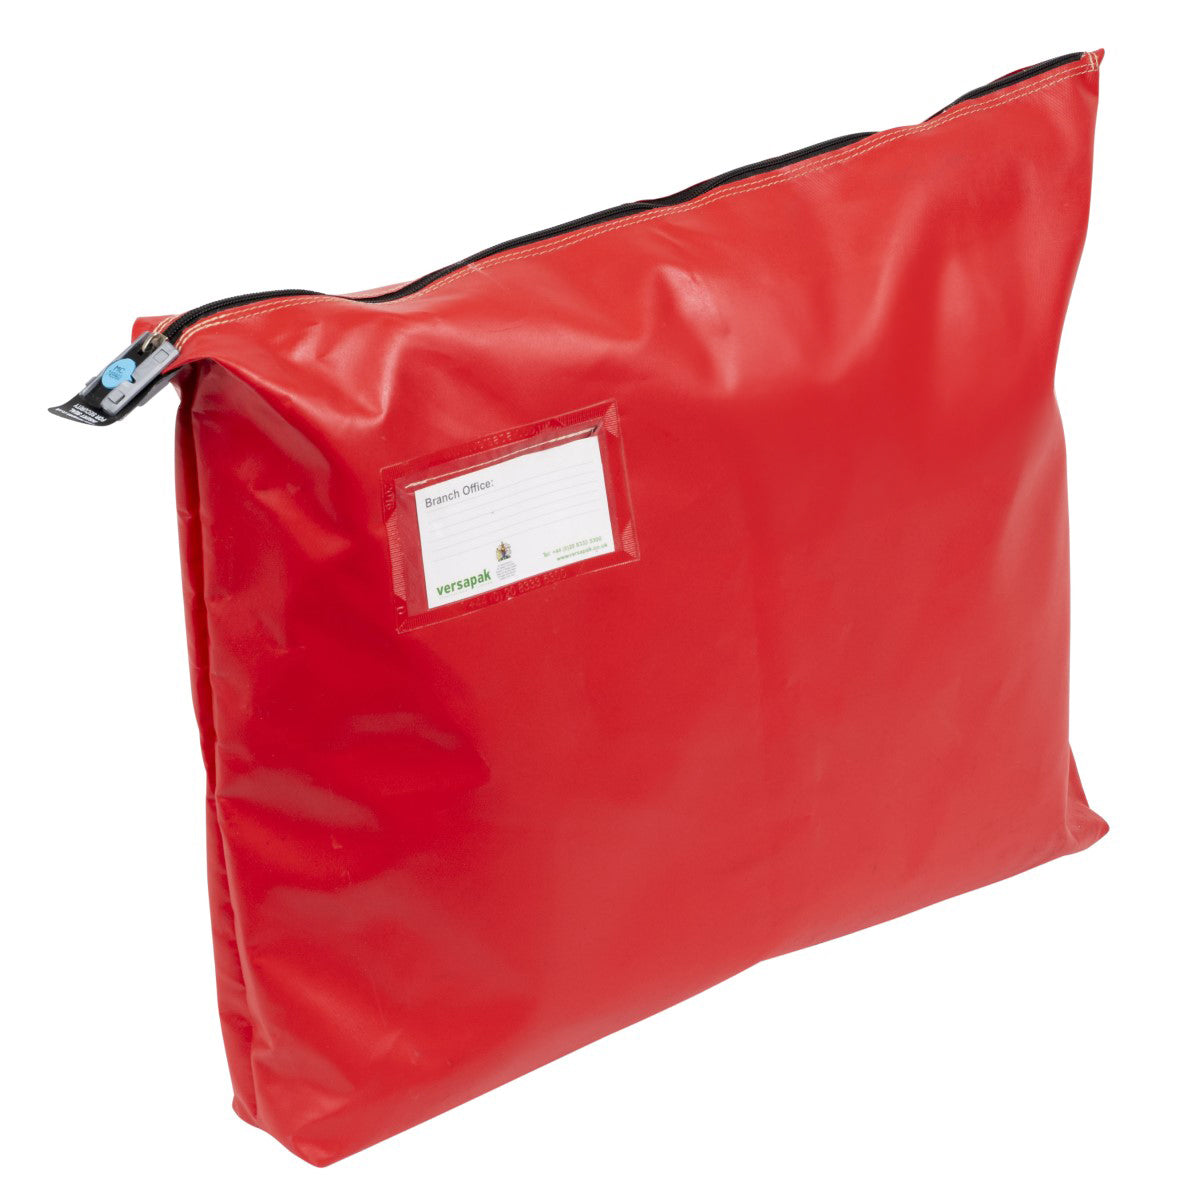 Single Seam Mail Pouch with Gusset CG6 Button Red